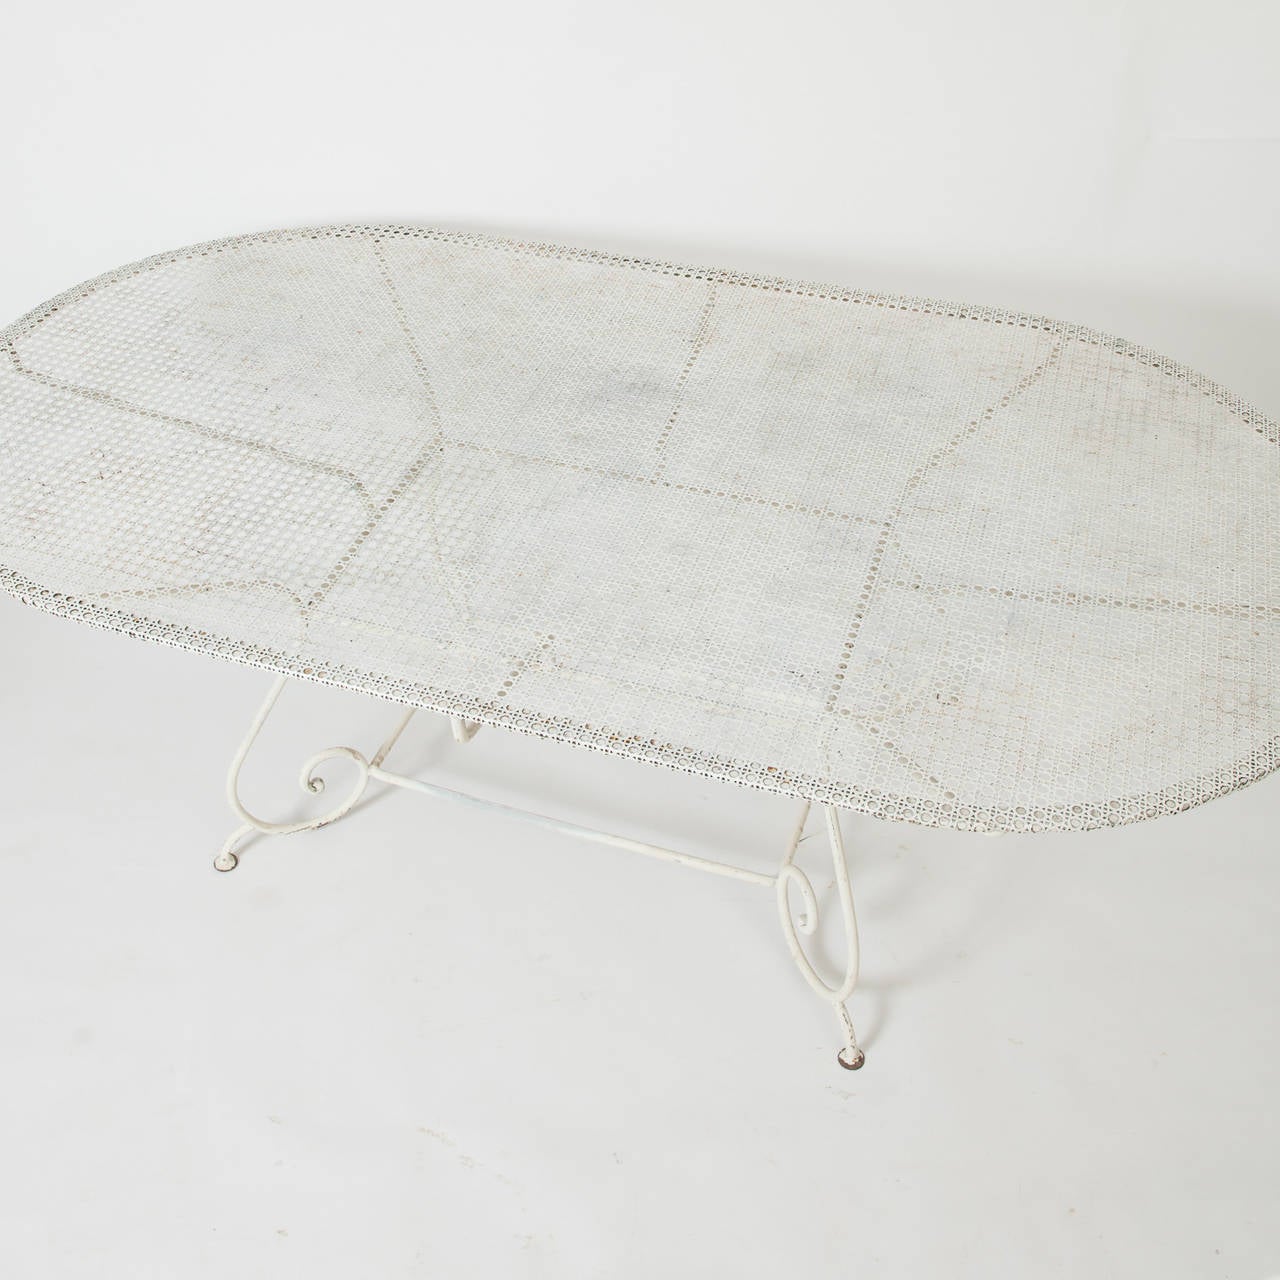 This French garden table is unusual because of it size and versatile oval shape. It can sit eight to ten people comfortably. The scrolled base is recessed to allow lots of leg room. The pierced top is in great condition.